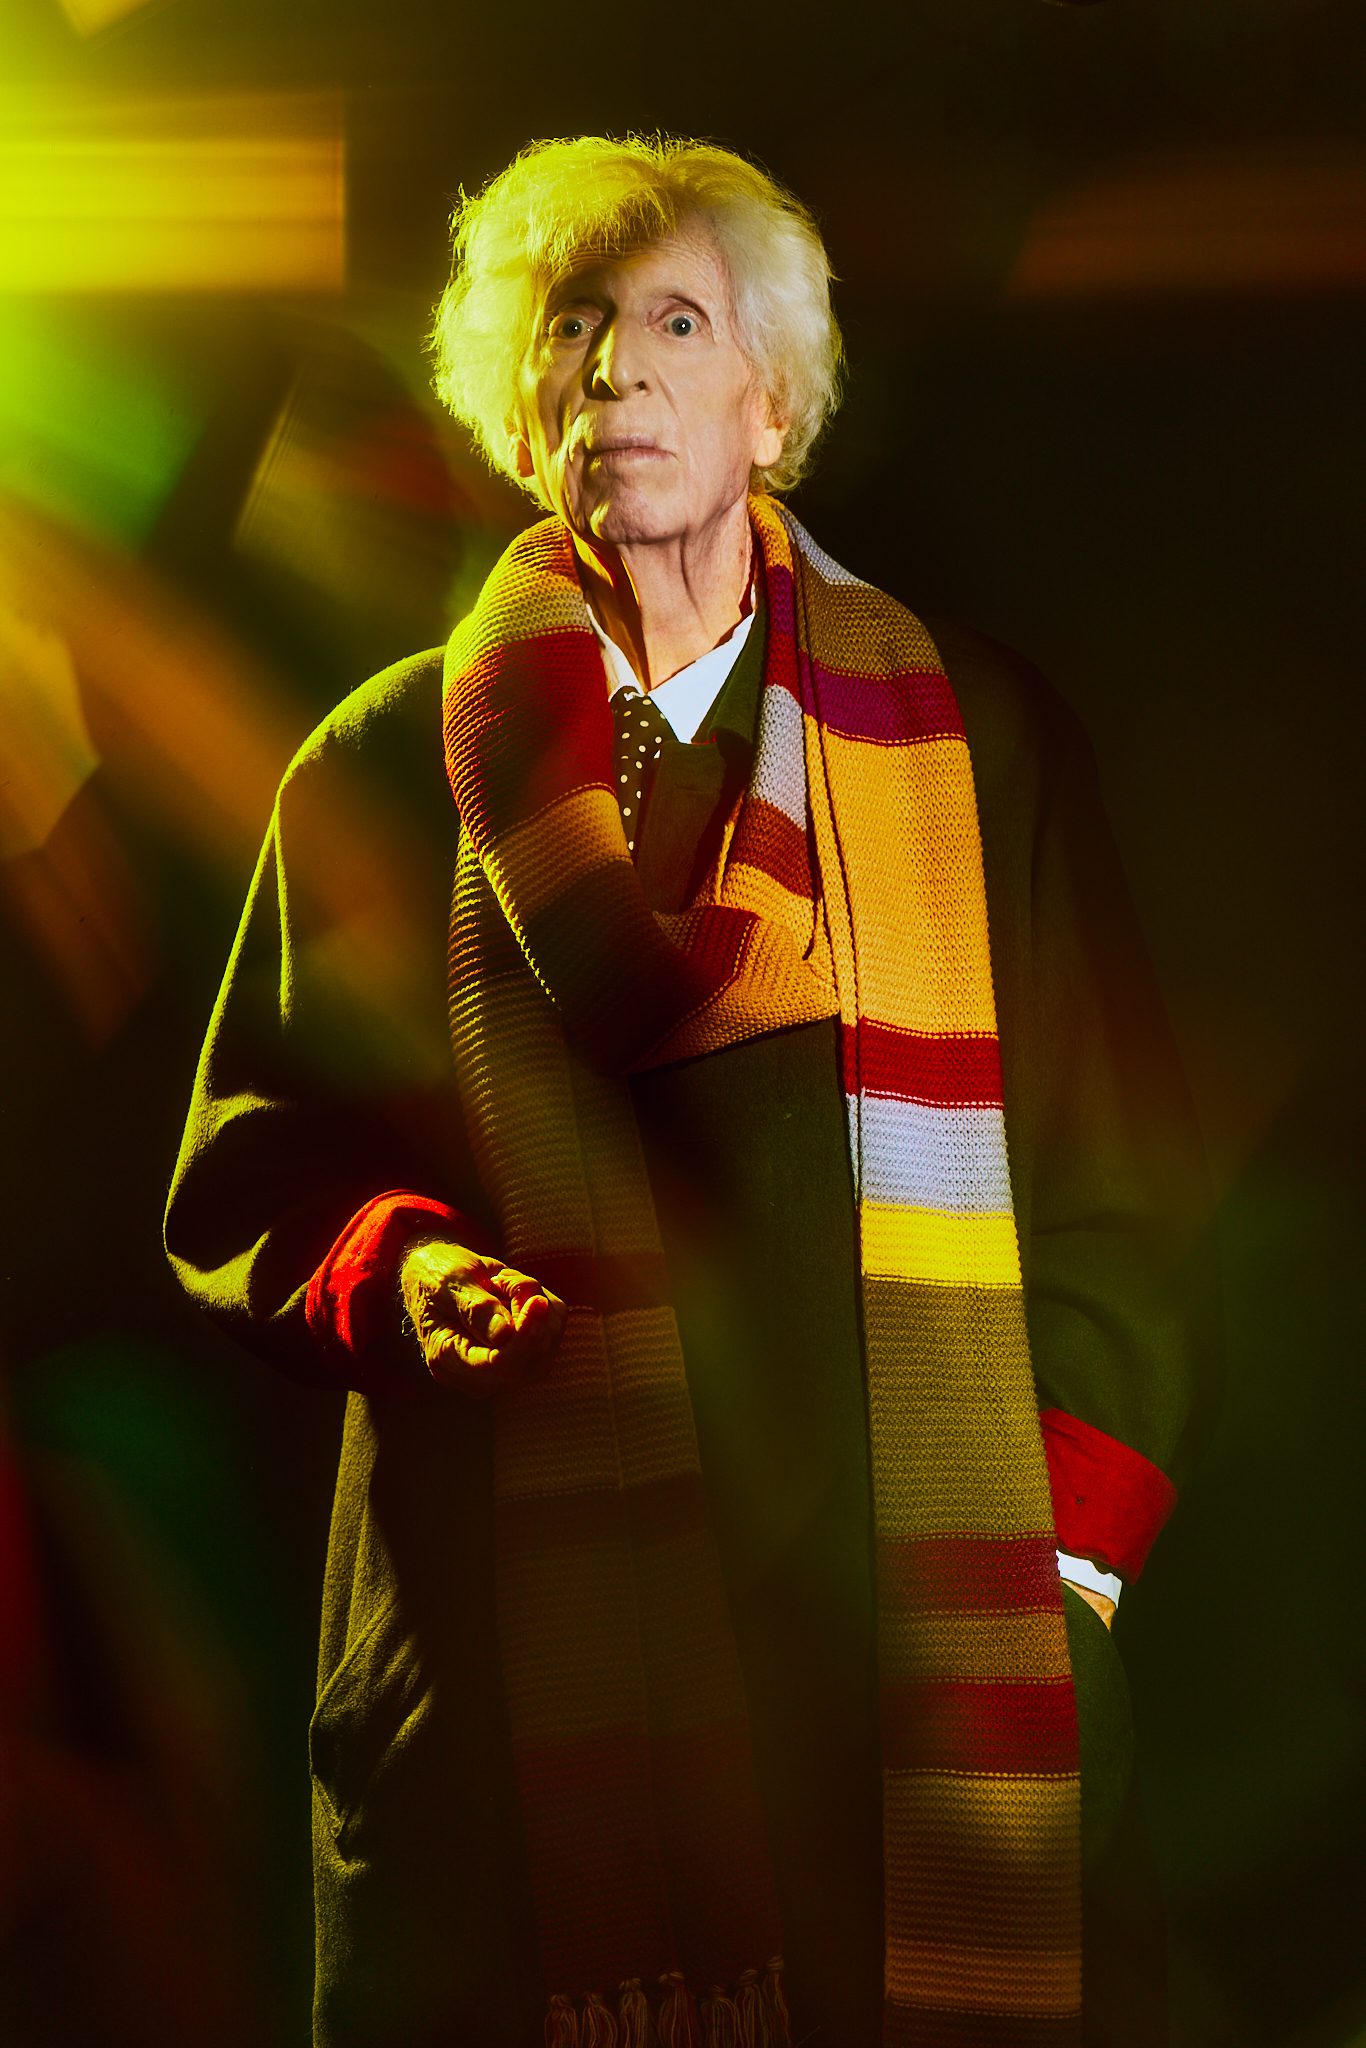 Tom Baker in a replica of his Fourth Doctor scarf, standing up.